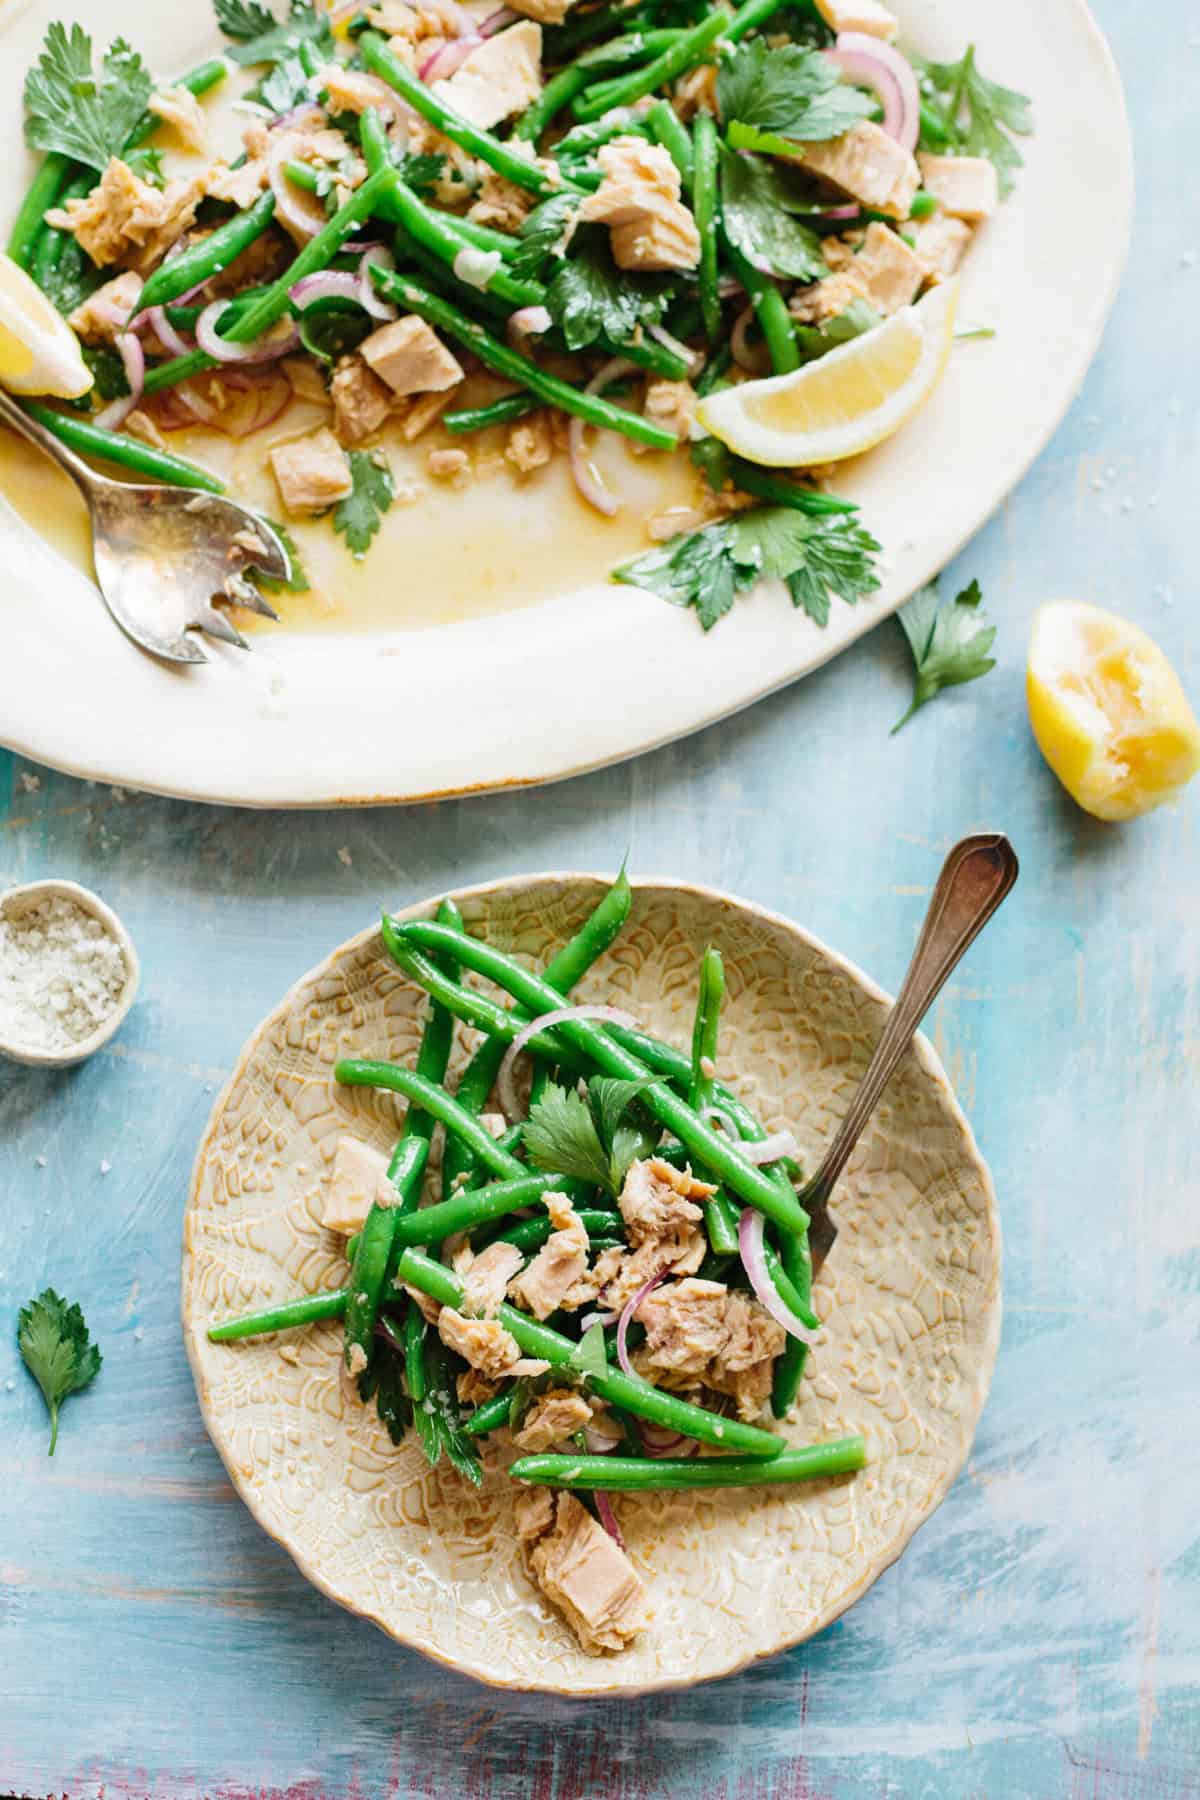 Two plates of Italian tun and green bean salad with lemons and herbs.